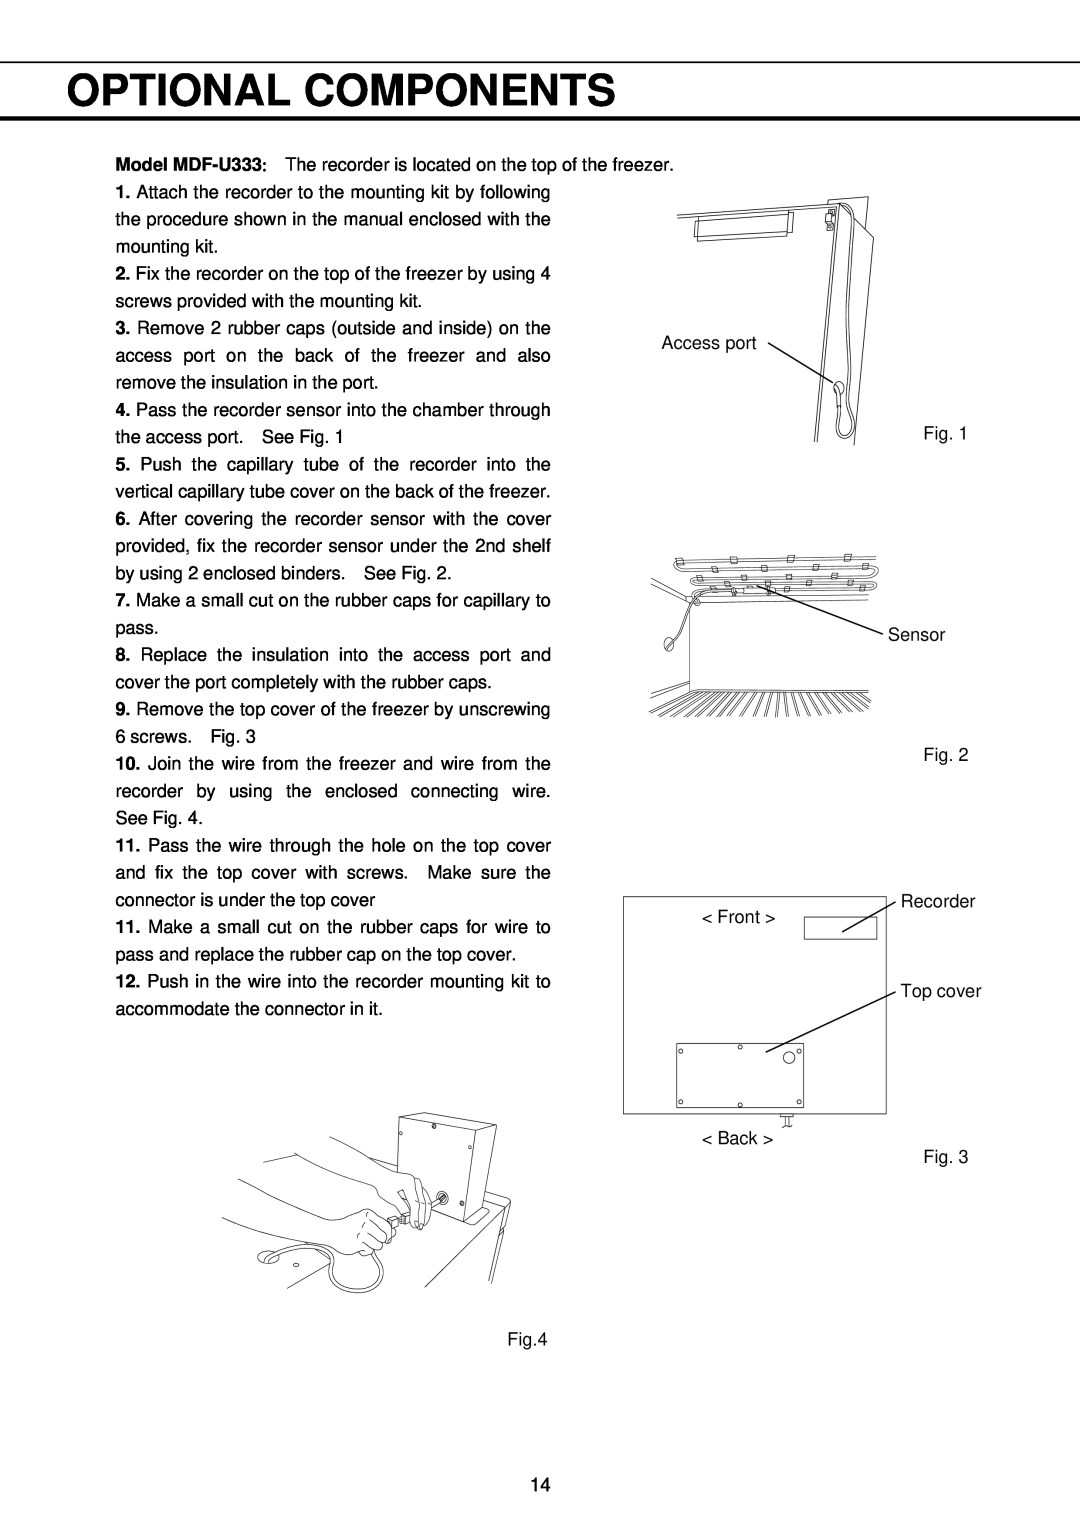 Sanyo MDF-U537 instruction manual Optional Components, Model MDF-U333 The recorder is located on the top of the freezer 